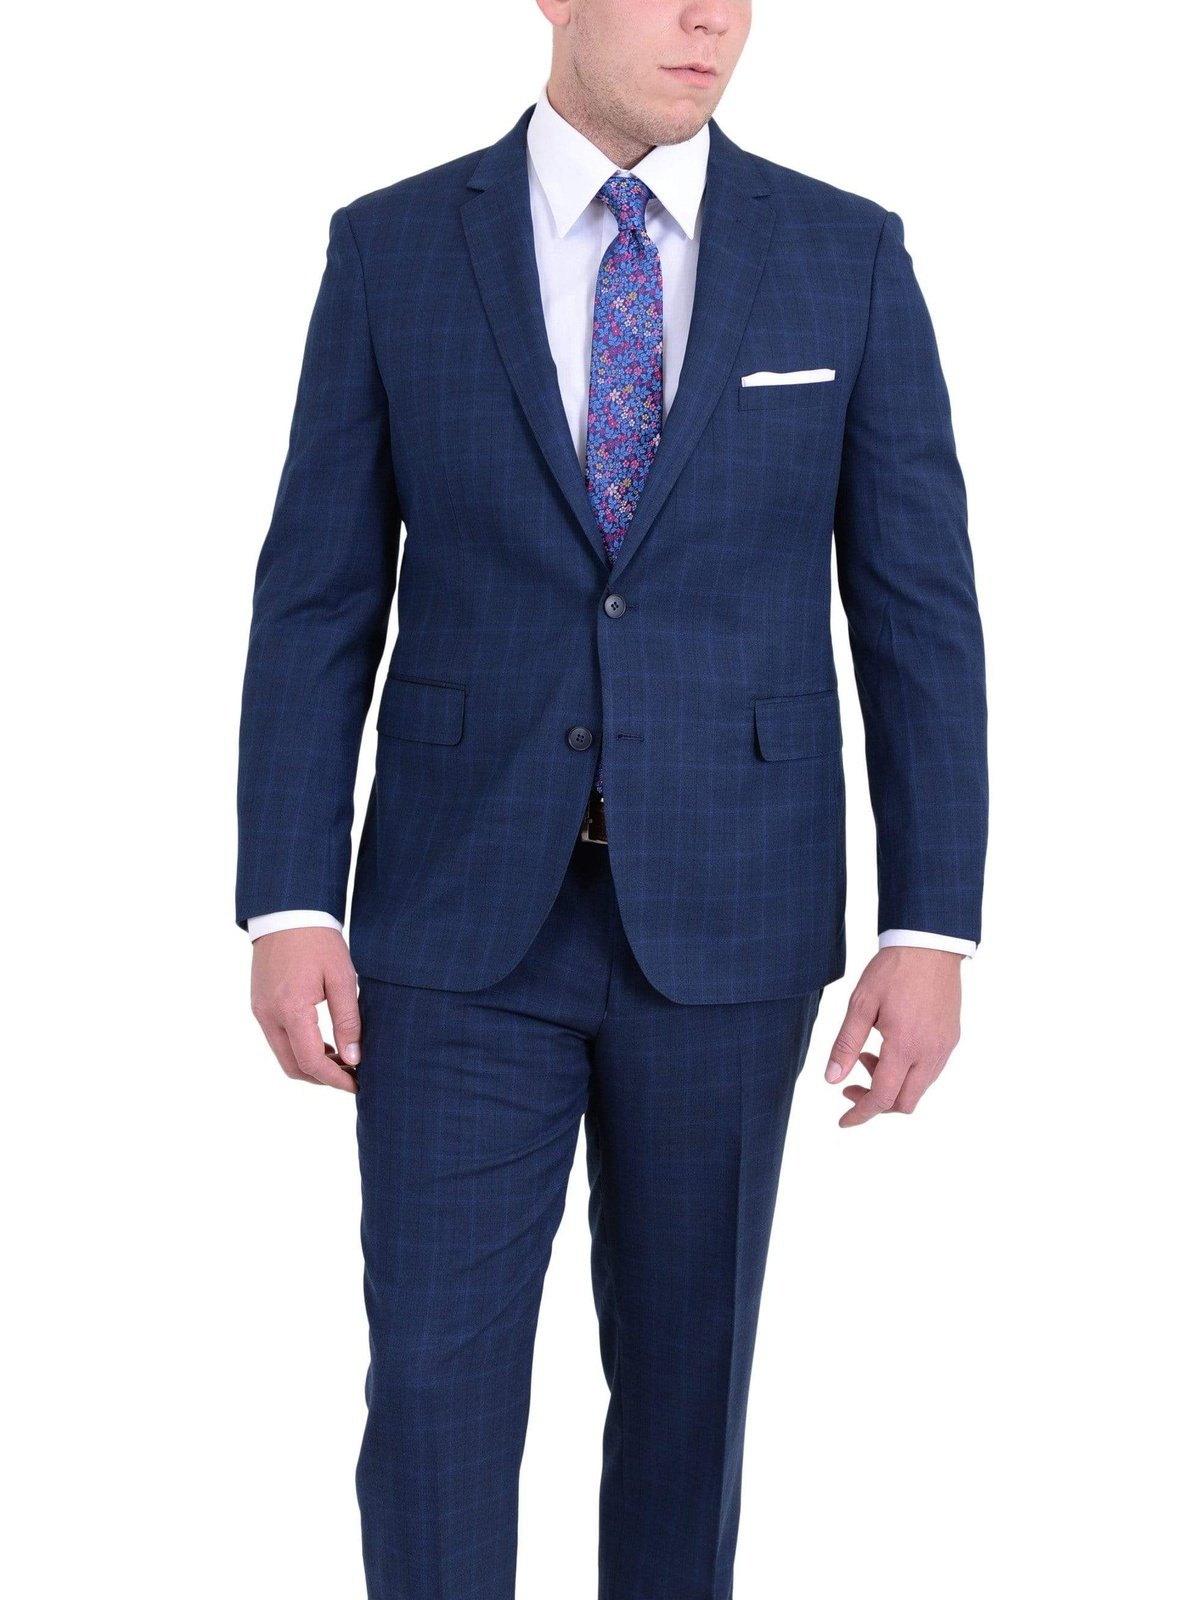 London Fog TWO PIECE SUITS 36S Mens Extra Slim Fit Blue Windowpane Two Button Wool Blend Suit